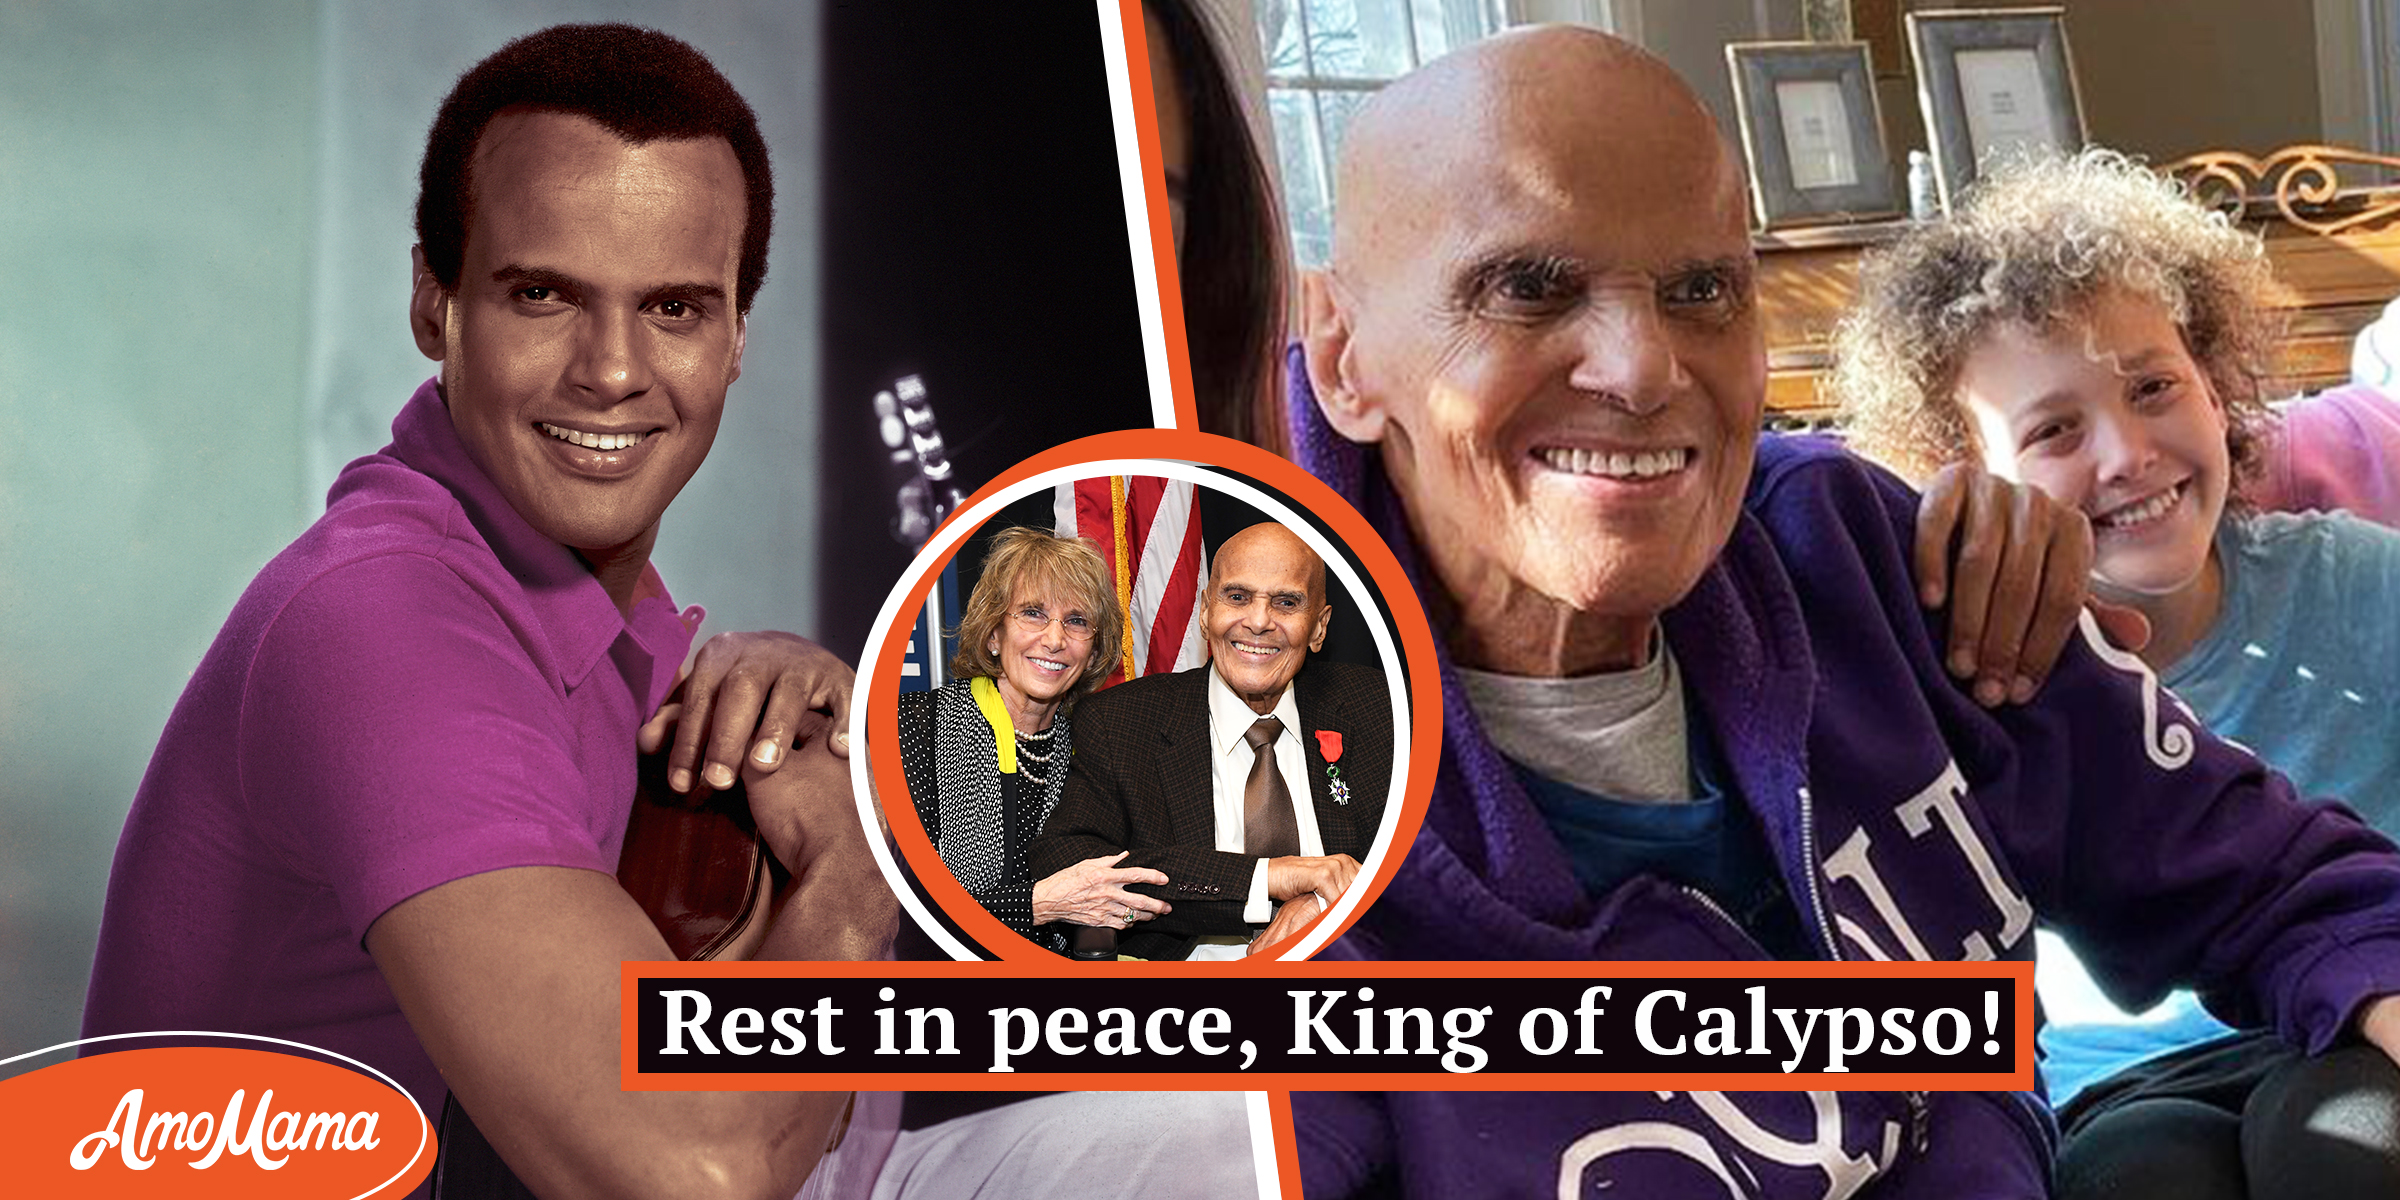 Harry Belafonte dies at 96, with his wife by his side